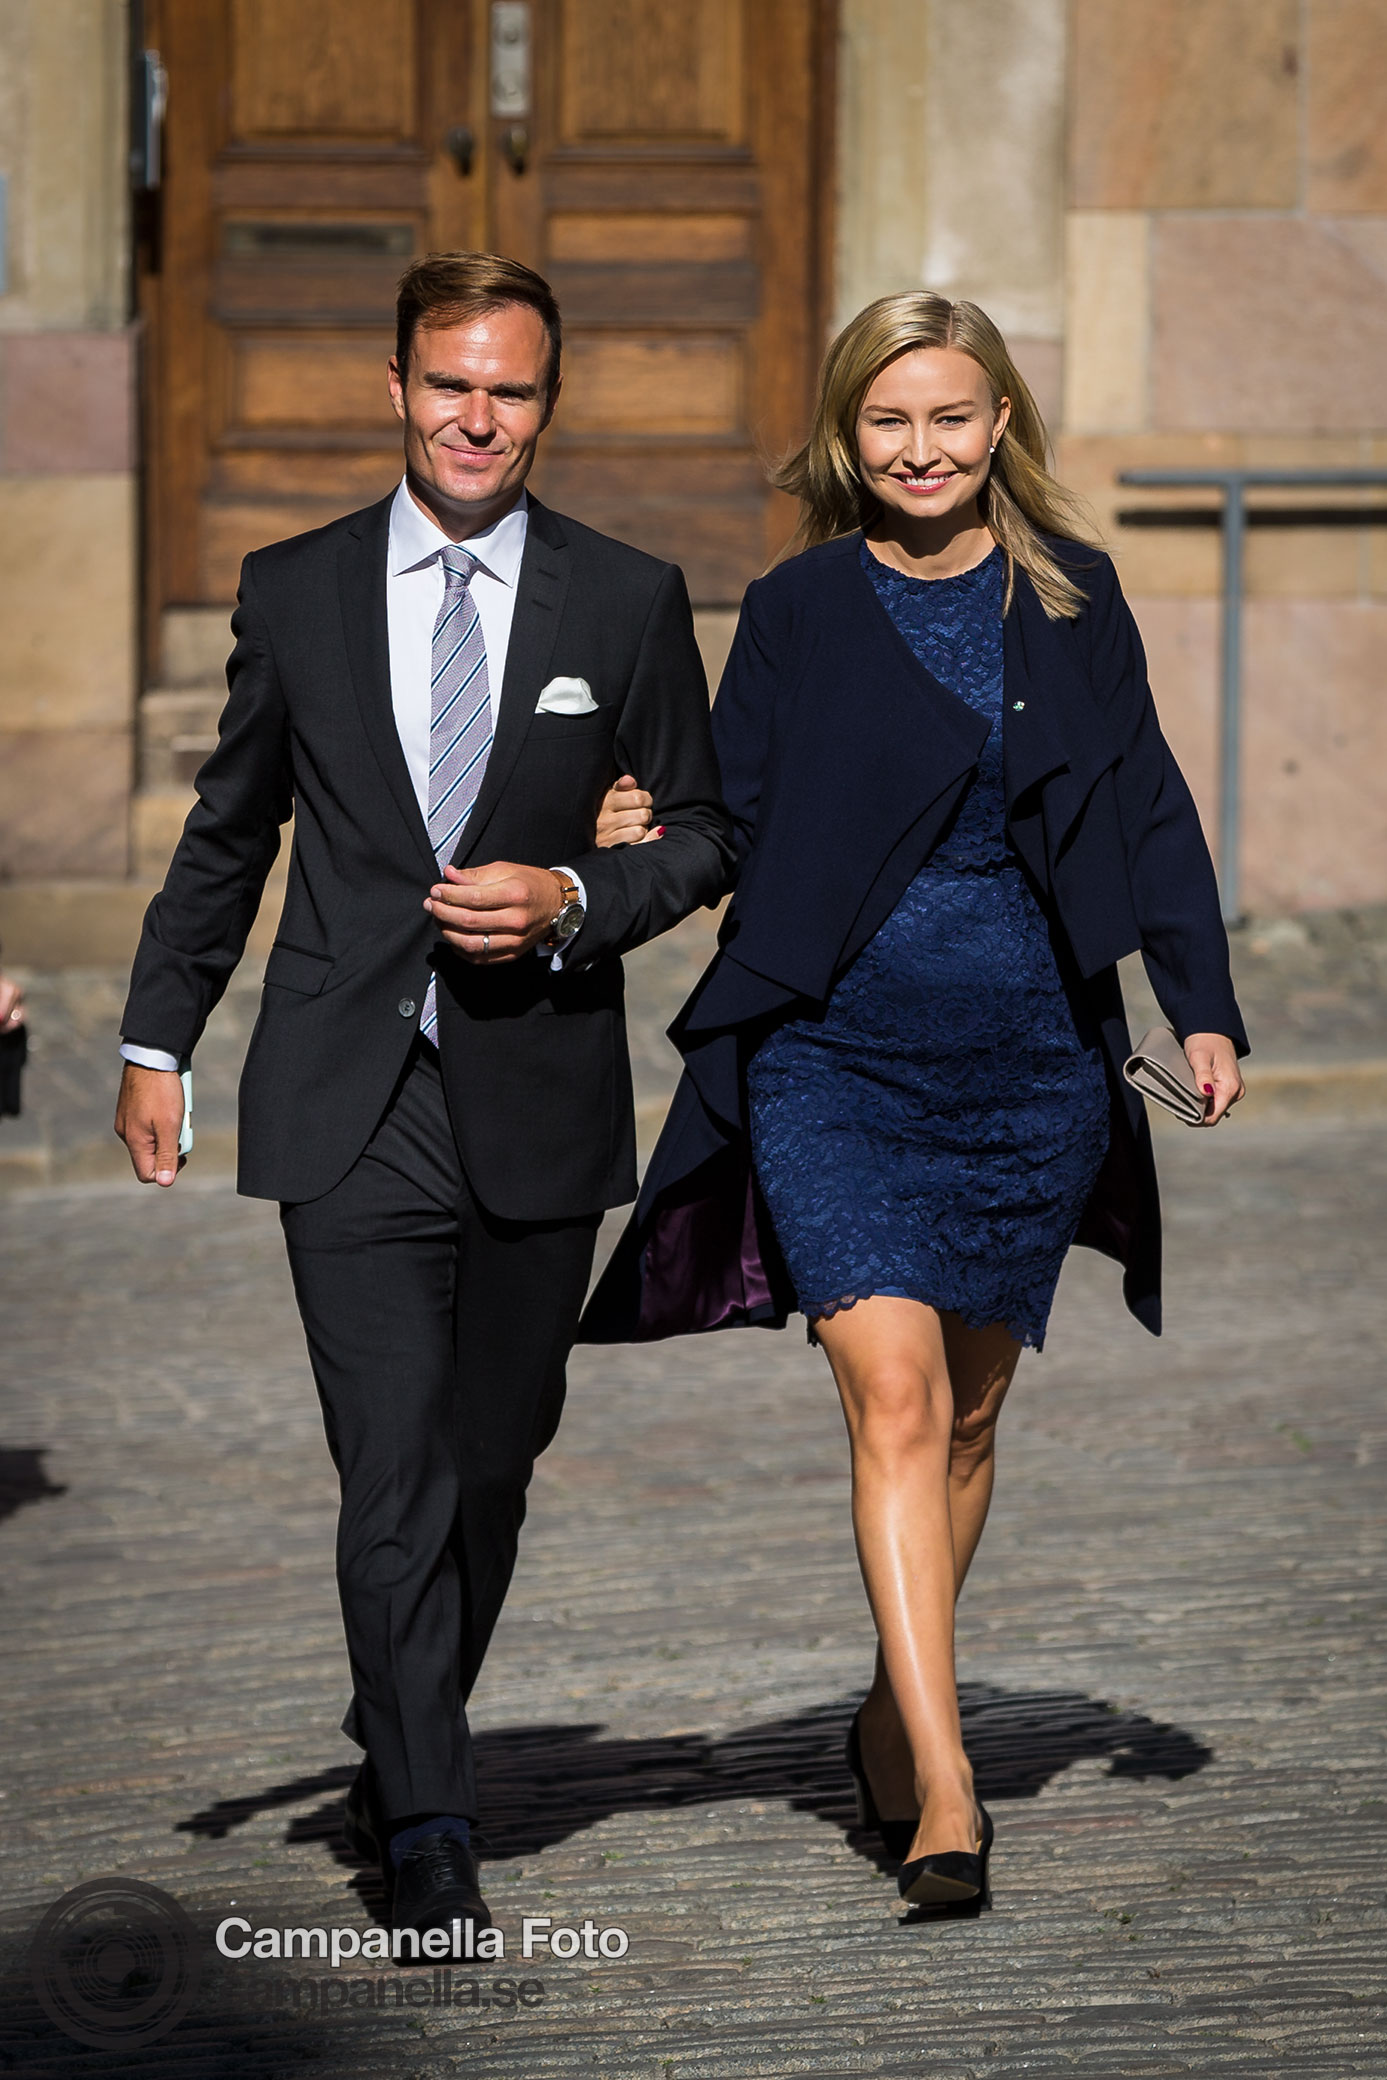 Riksdag Opening Session - Michael Campanella Photography